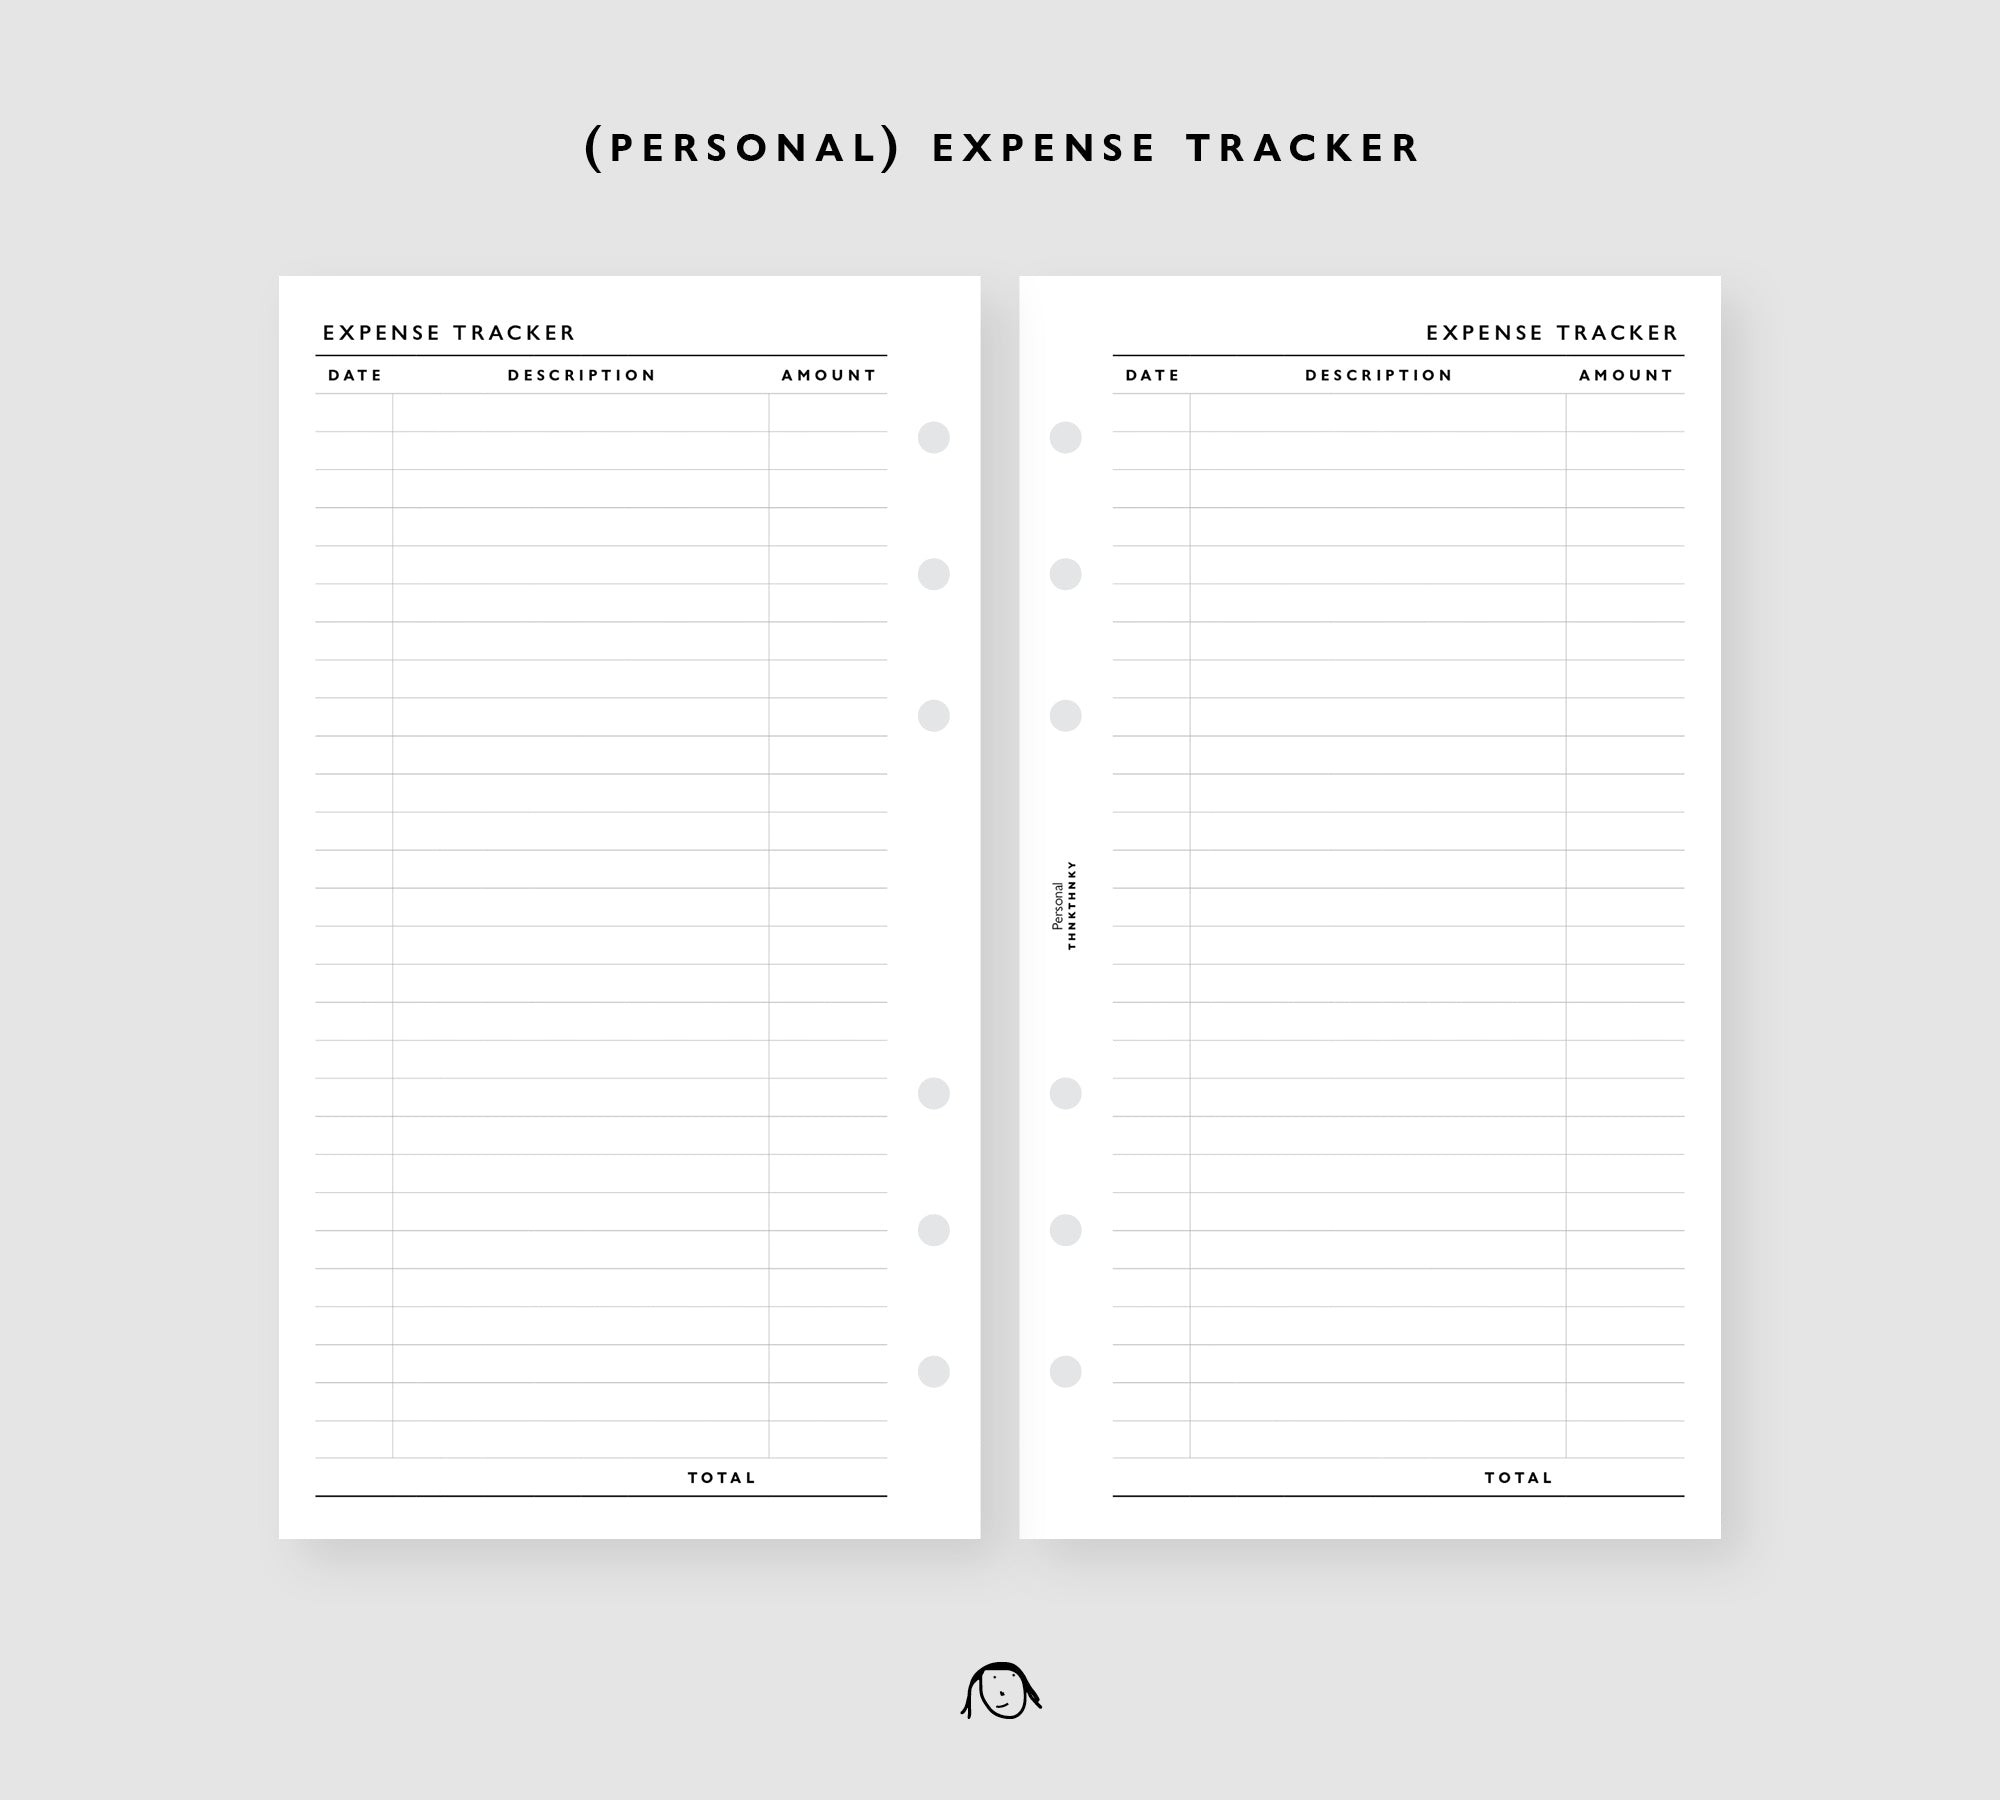 PEE3-Personal Size Expense Tracker